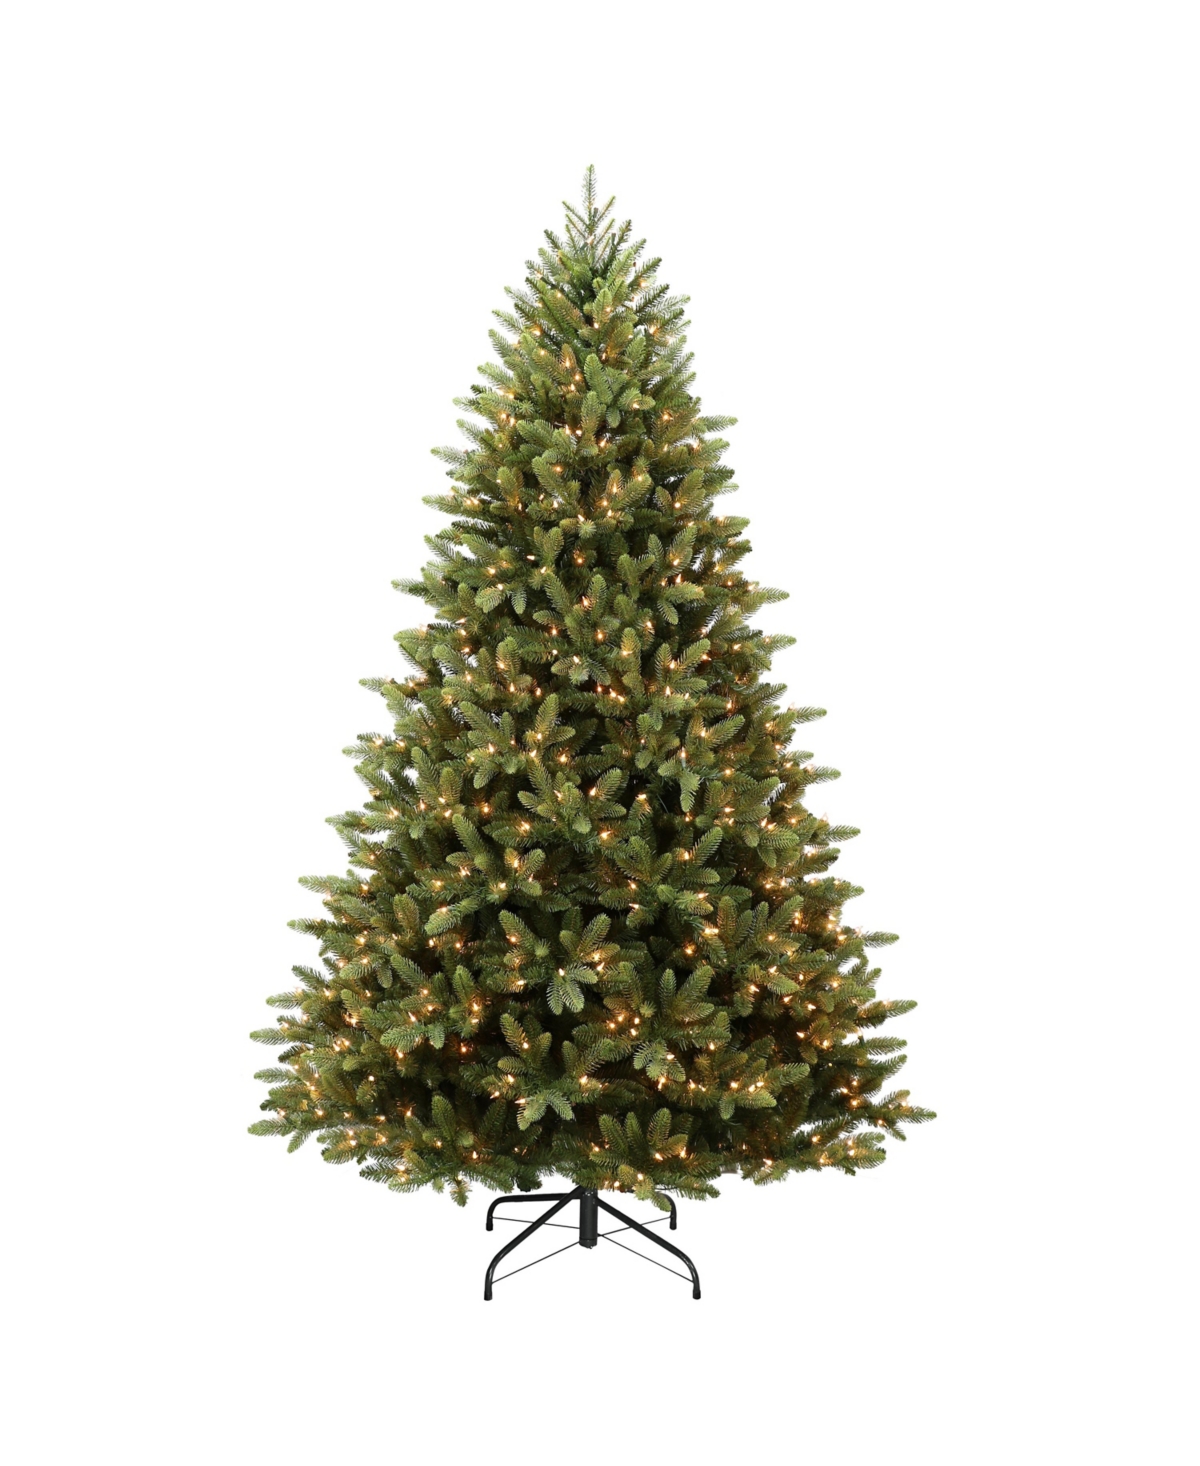 Puleo 6.5' Pre-lit Westford Spruce Tree With 500 Underwriters Laboratories Clear Incandescent Lights, 1916 In Green